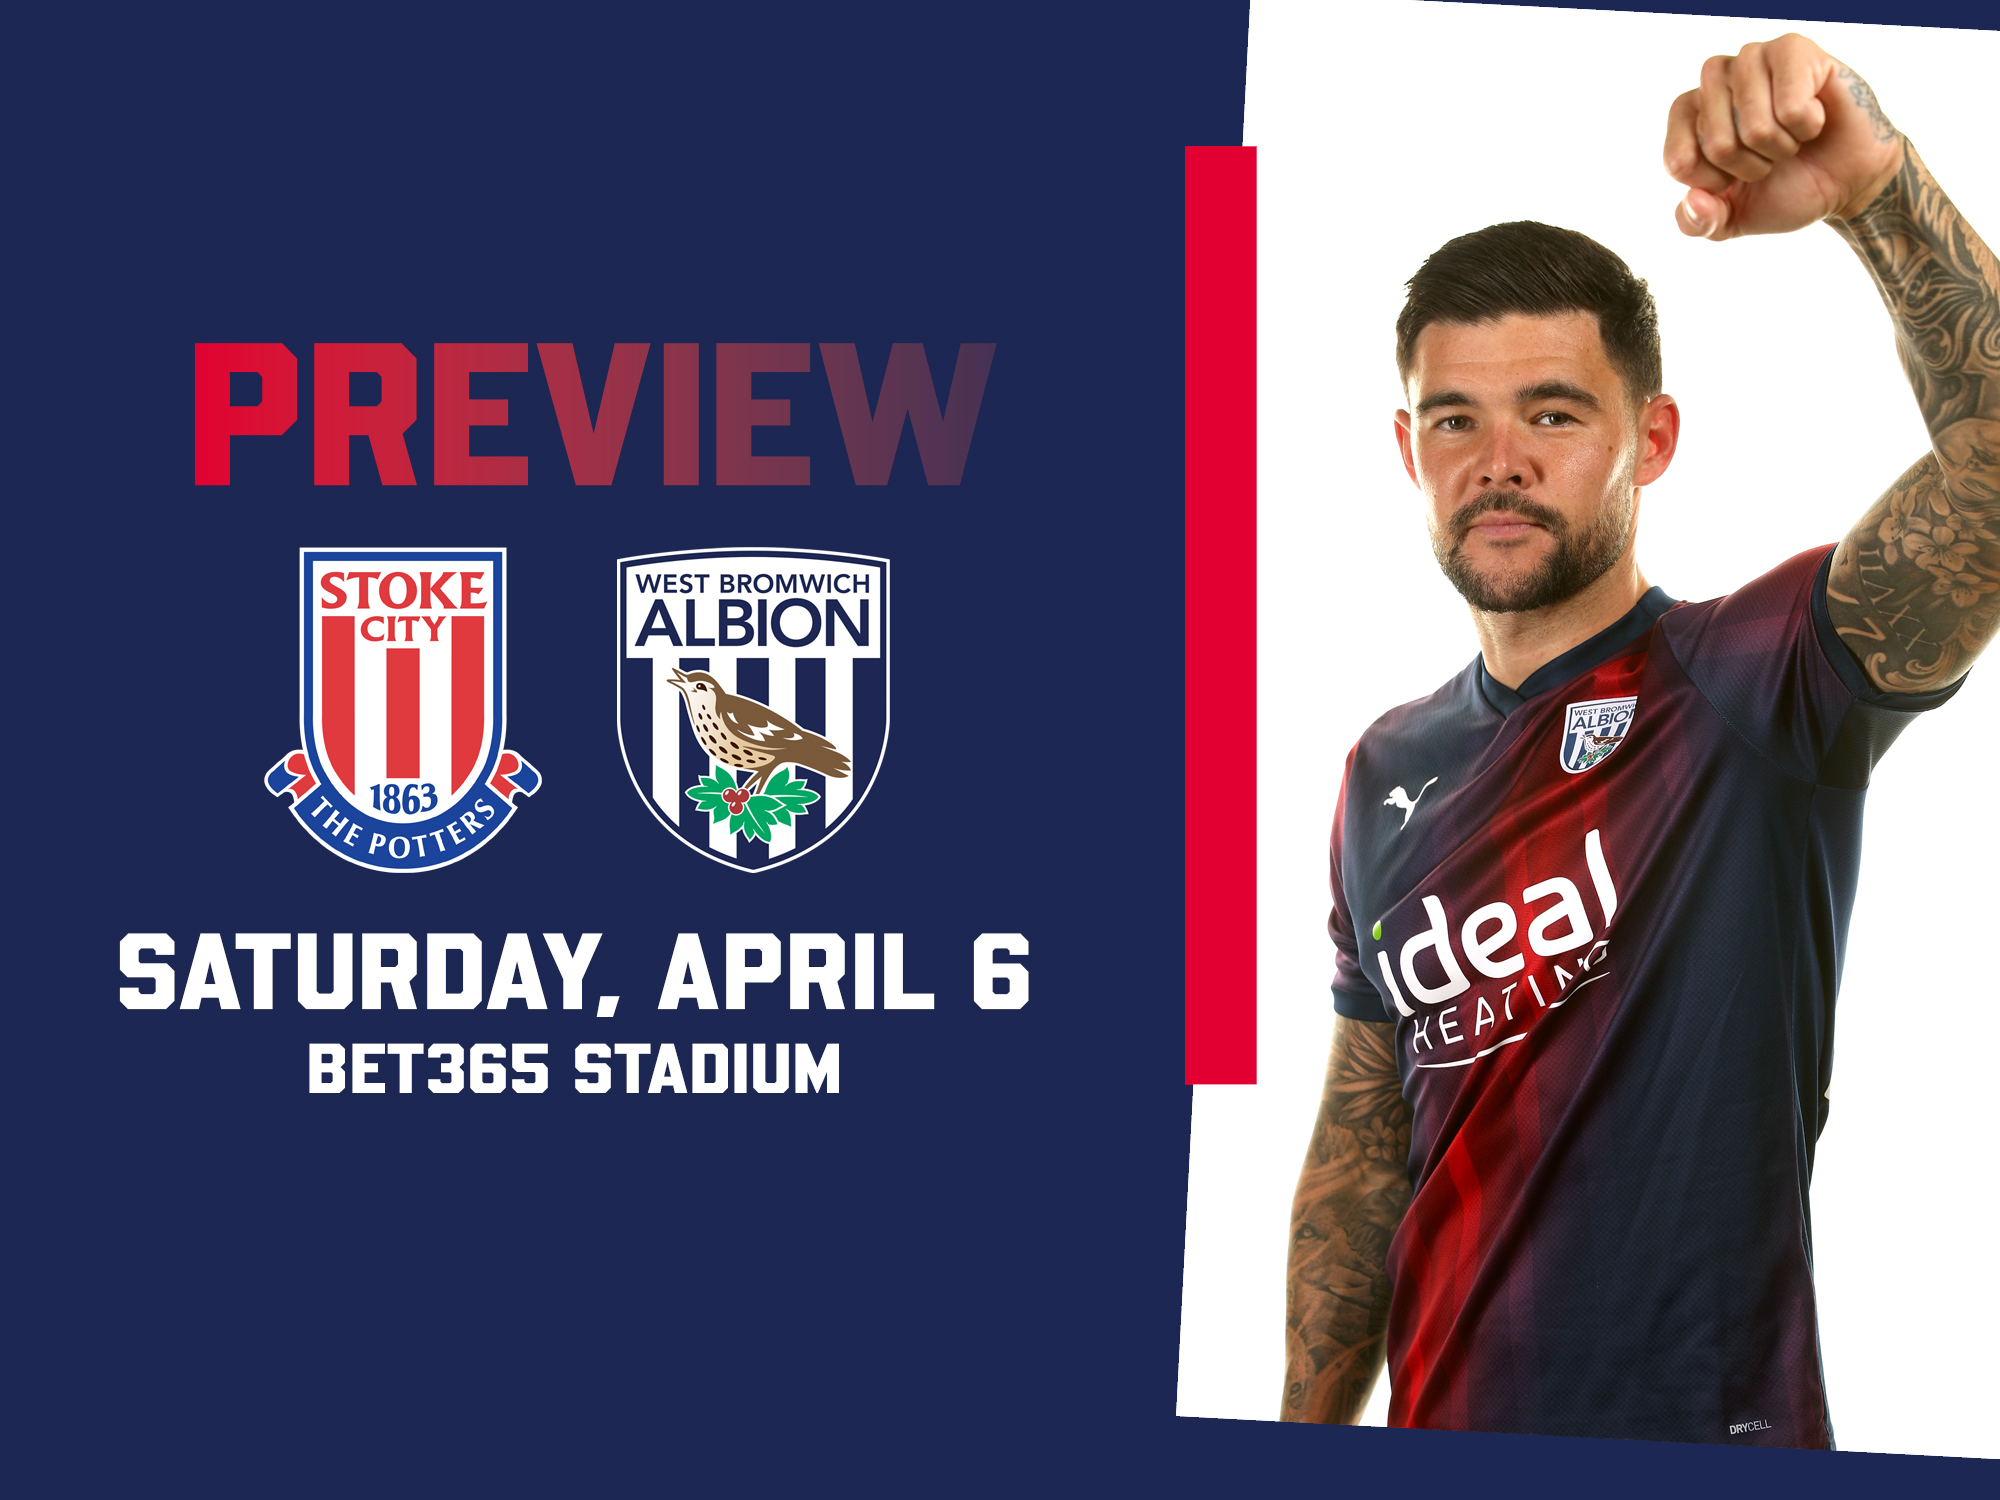 Stoke City & WBA badges on the navy-blue-and-red away preview graphic with an image of Alex Mowatt in those colours with his arm in the air